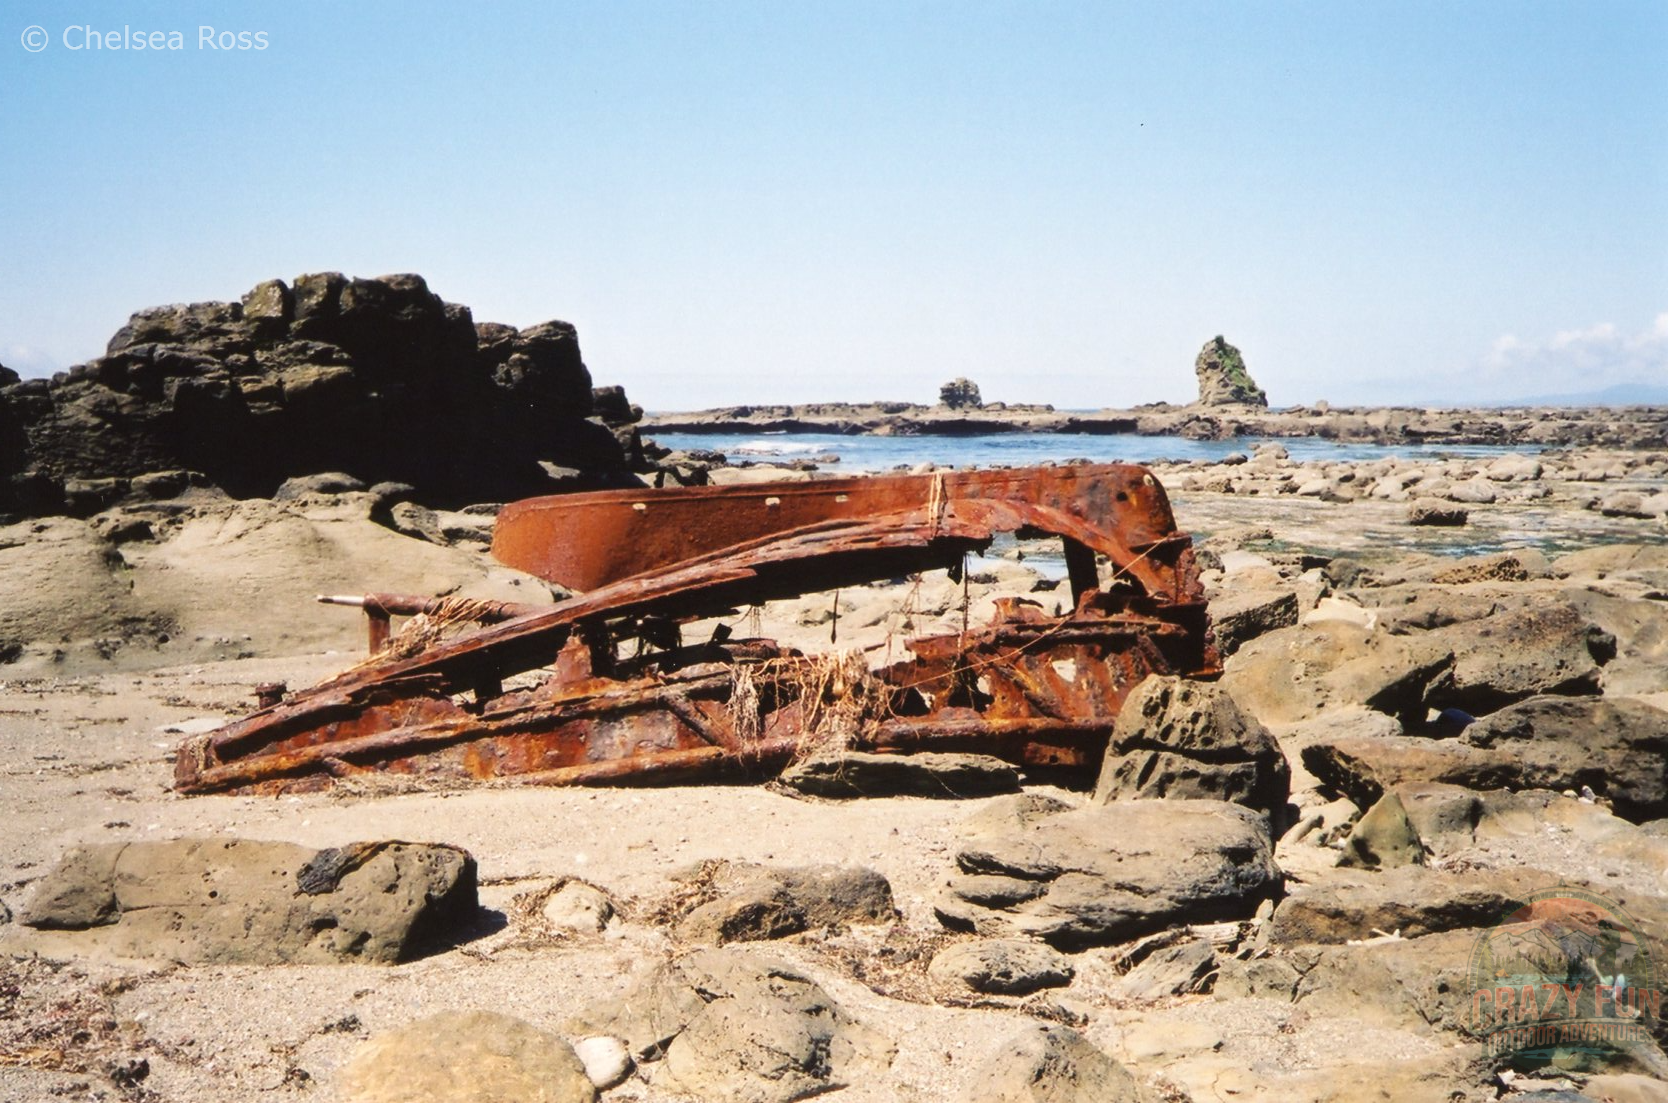 Part of old rusted boat on beach